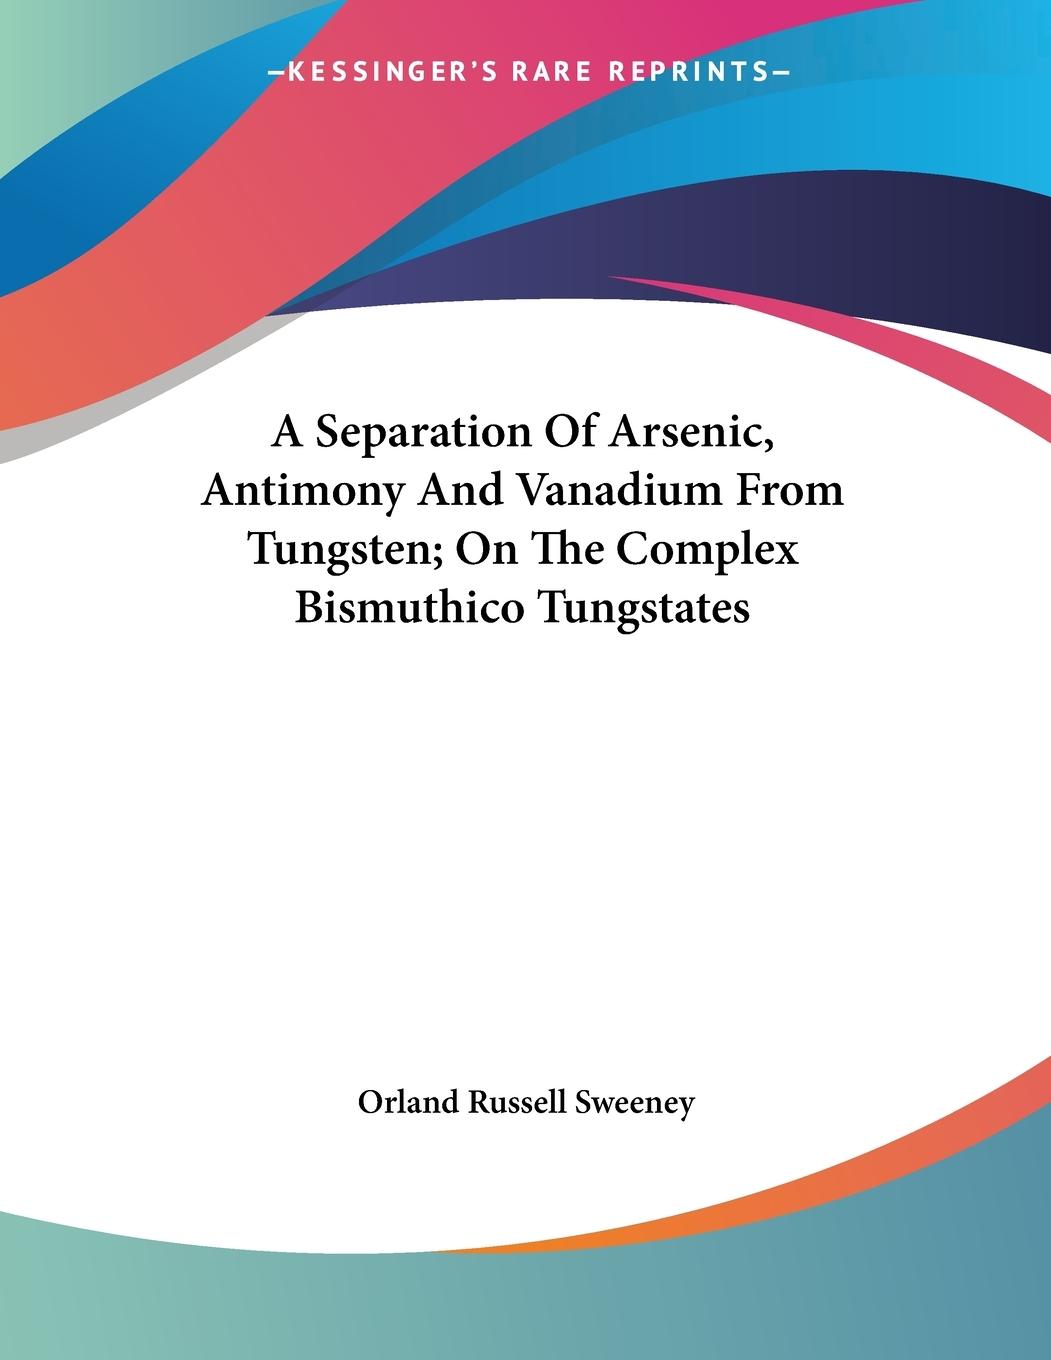 A Separation Of Arsenic, Antimony And Vanadium From Tungsten On The Complex Bismuthico Tungstates - Sweeney, Orland Russell